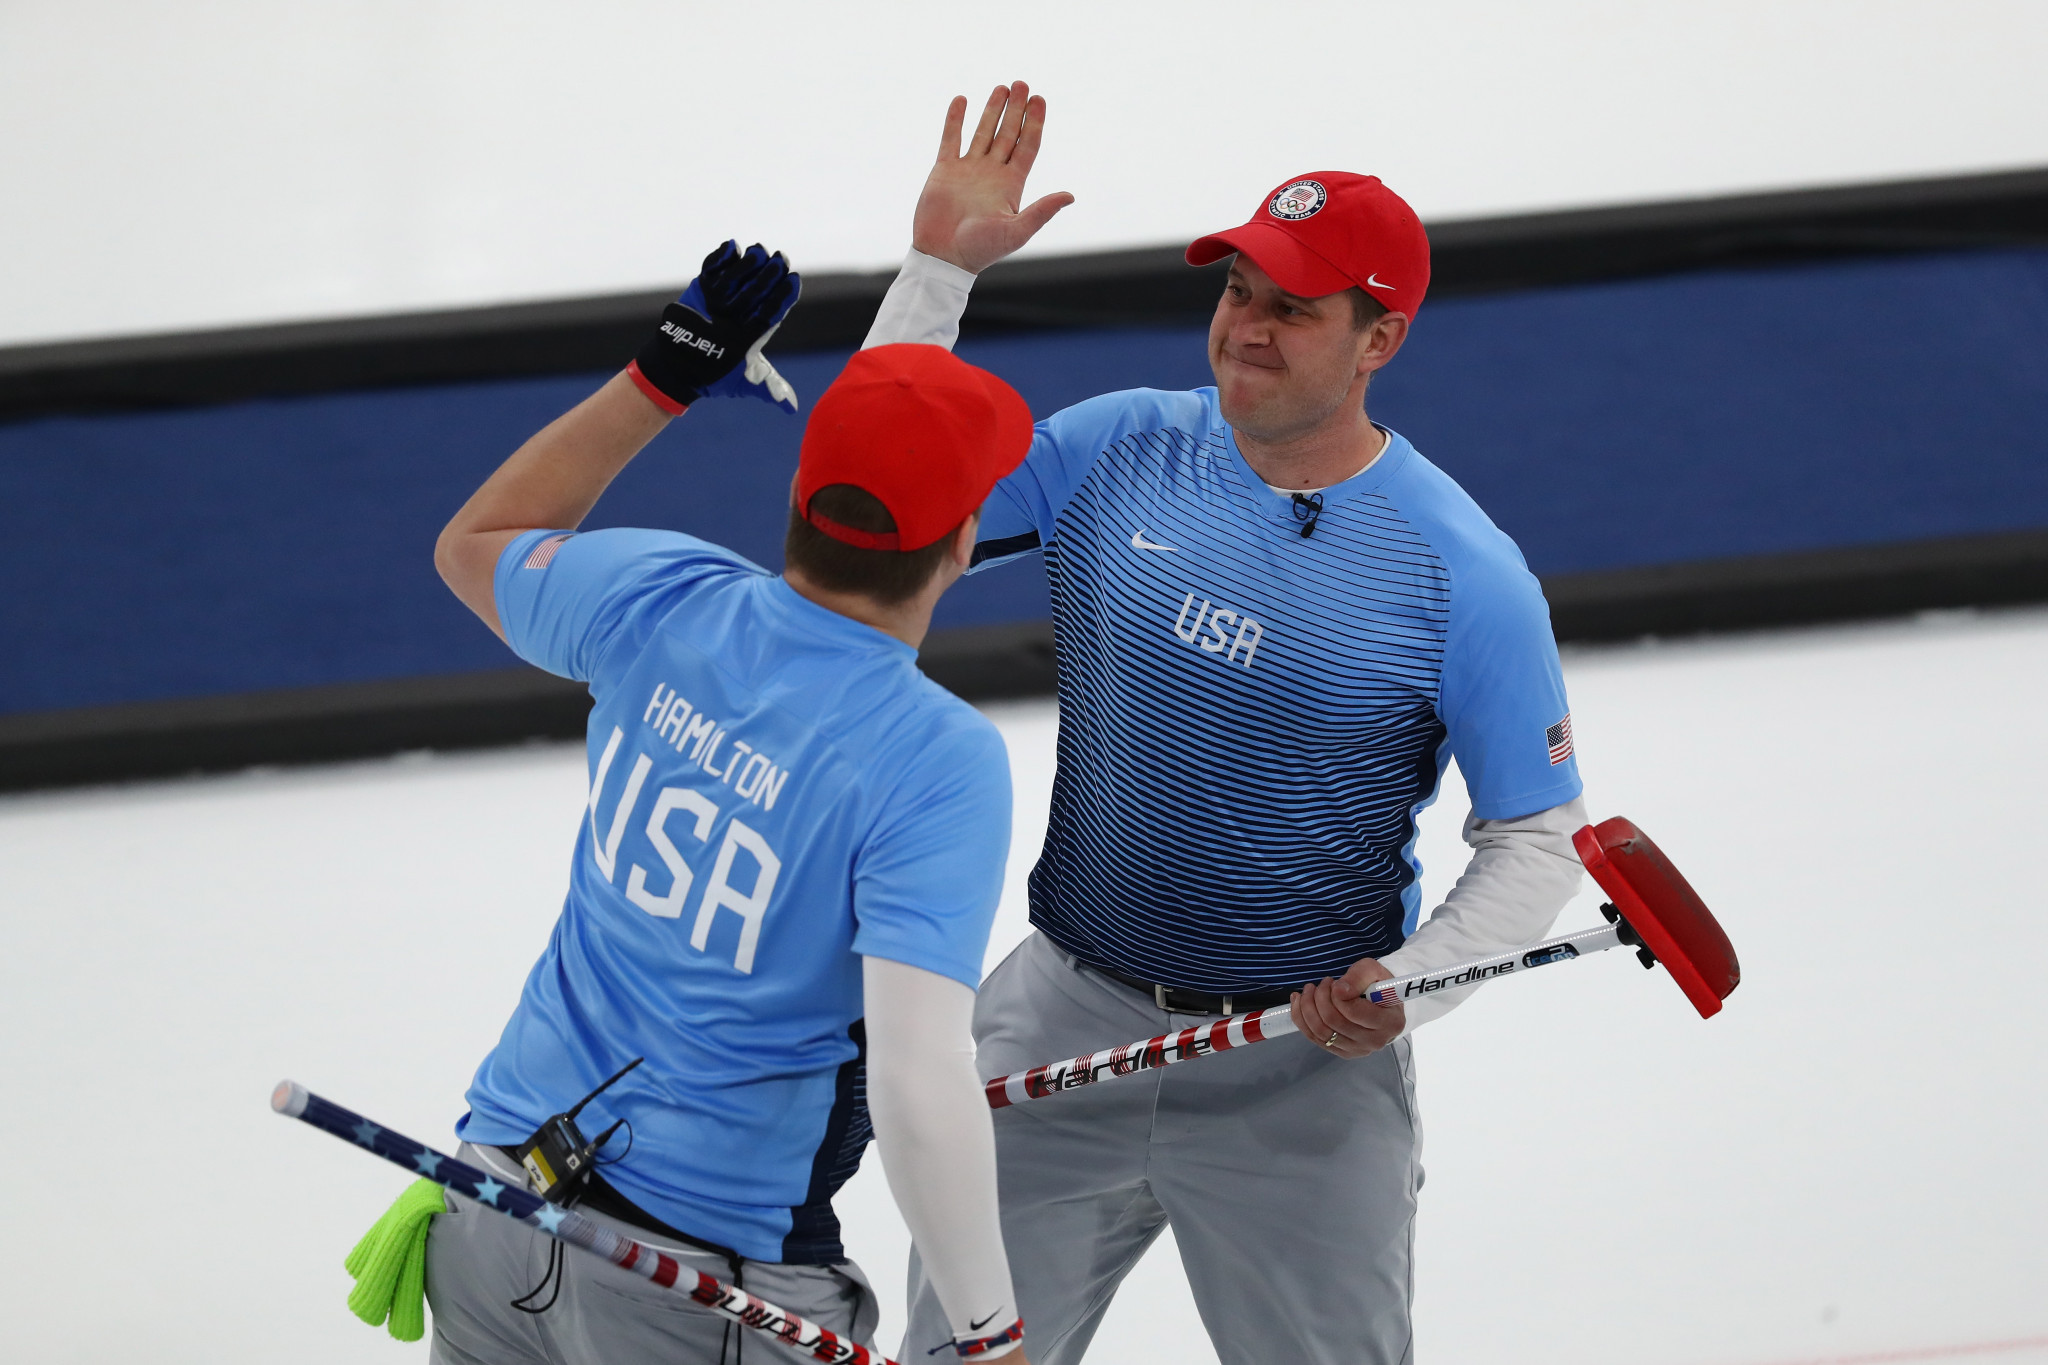 John Shuster's rink will be coached by Don Bartlett ©Getty Images